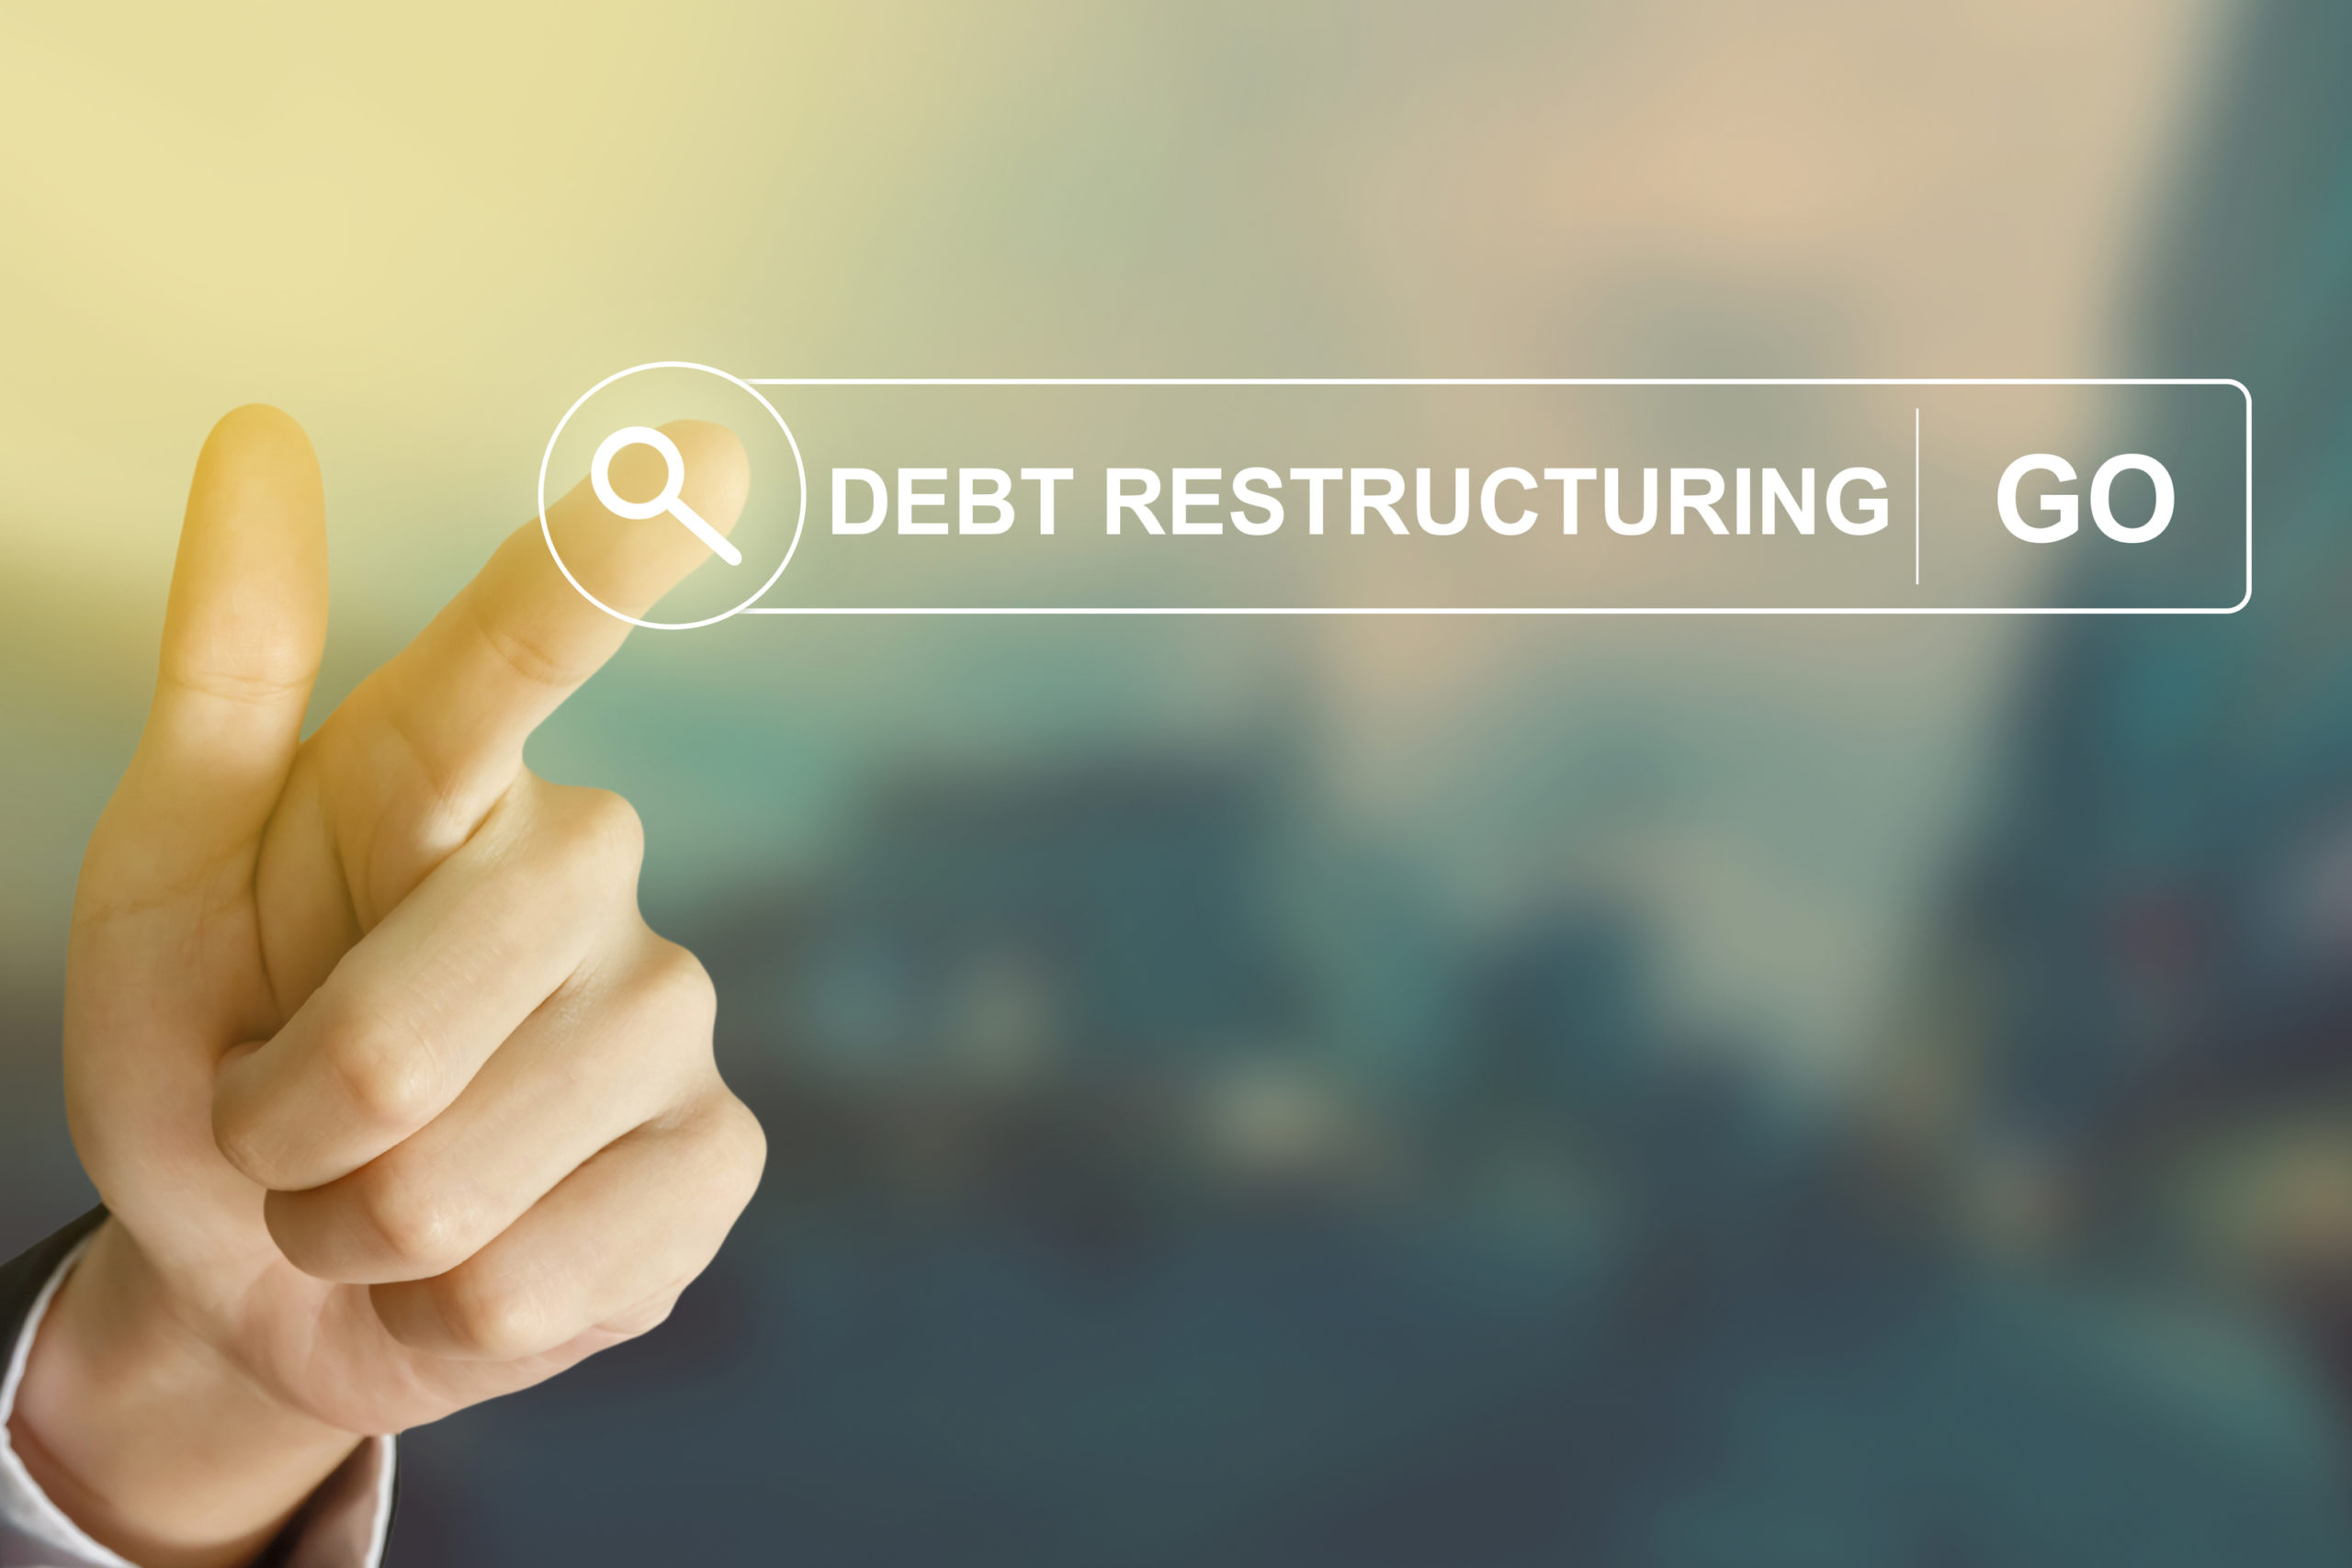 Solve Your Debt Problems With Consumer Credit Counseling